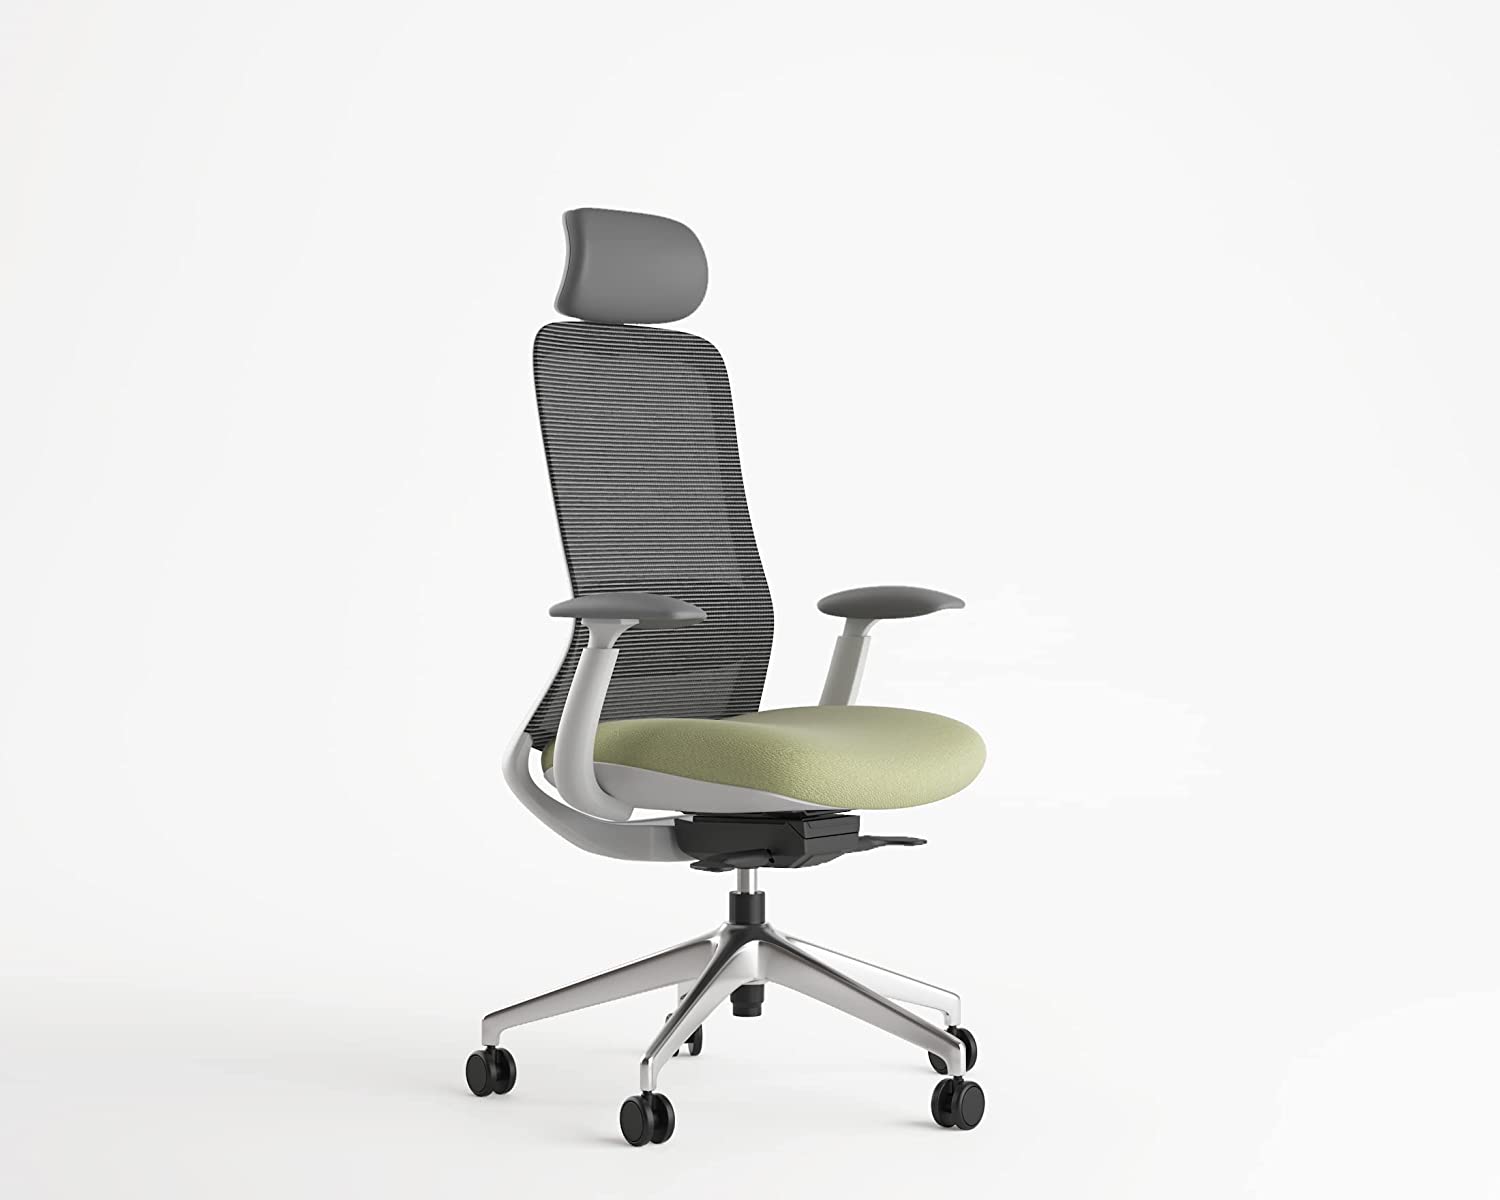 NIO Chair, Ergonomic Design, Premium Office & Computer Chair with adjustable features by Navodesk